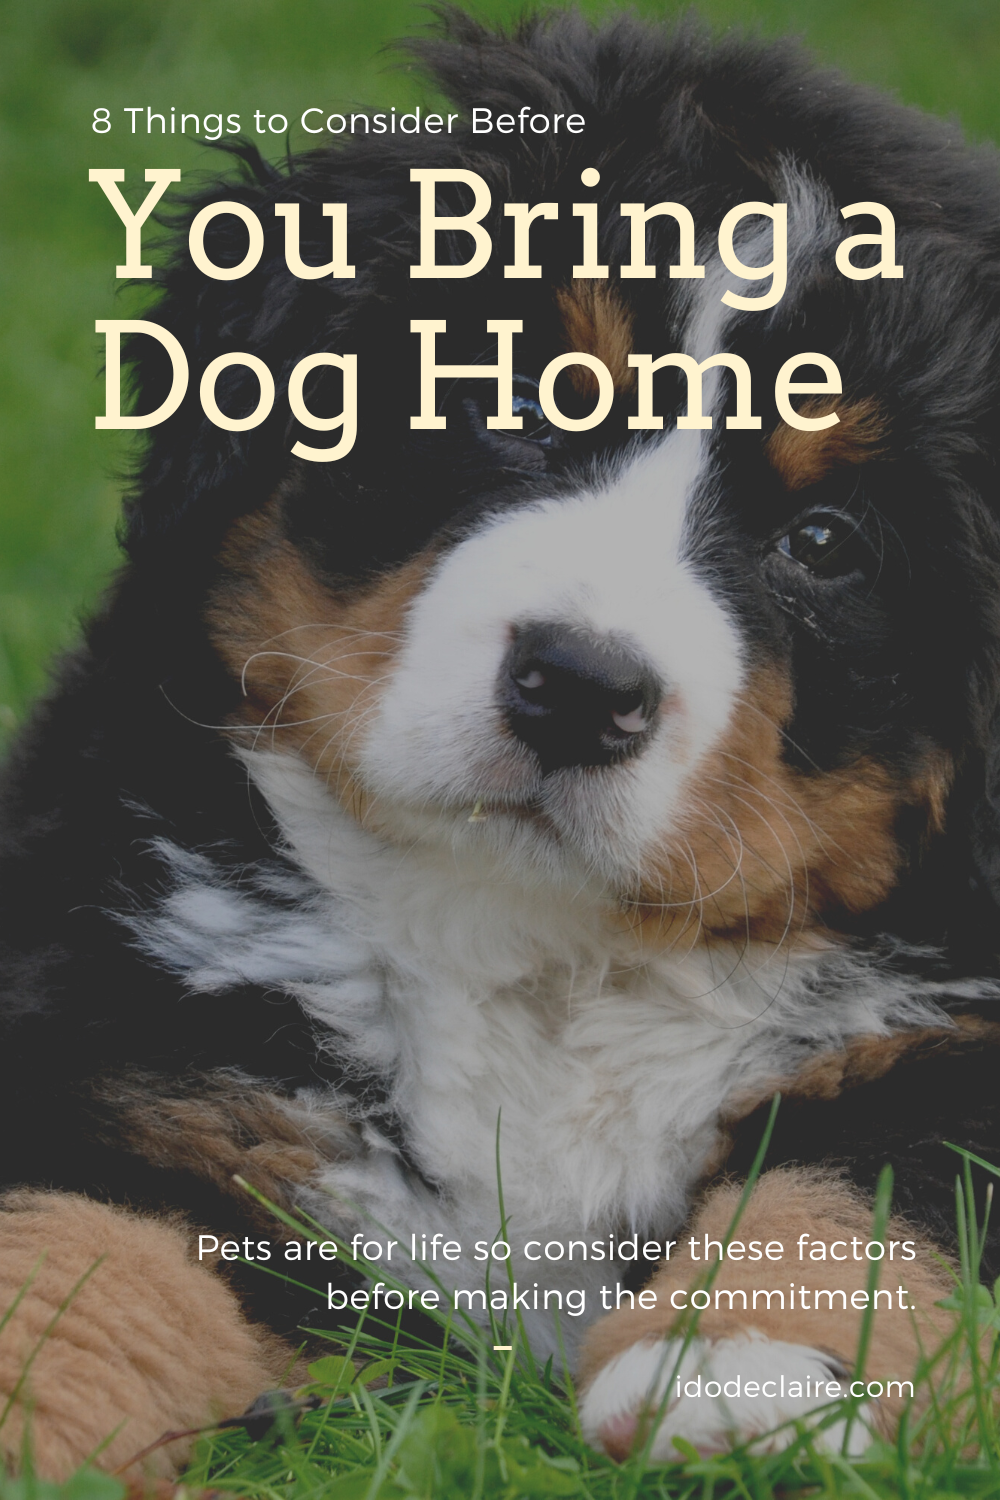 8 Things To Keep In Mind Before You Bring a Dog Home